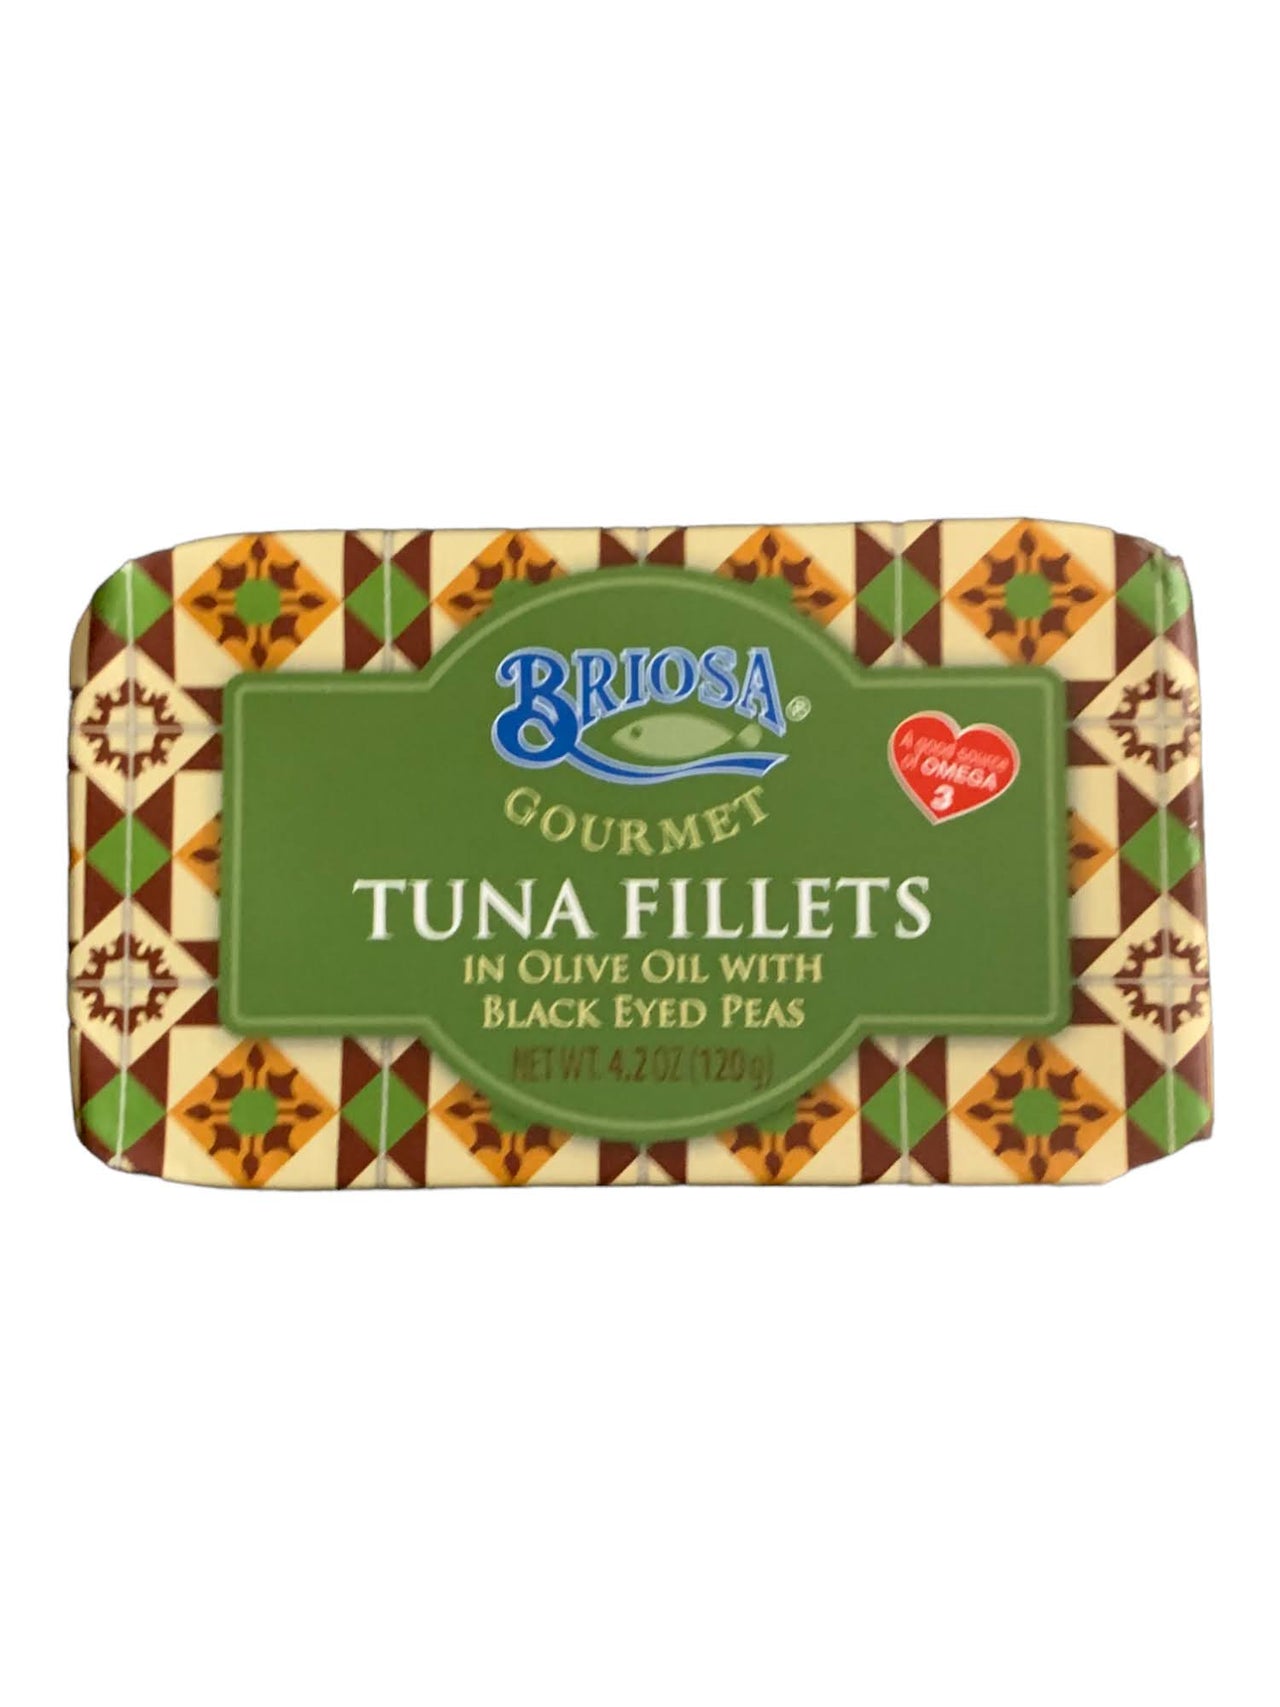 Briosa Gourmet Tuna Fillets in Olive Oil with Black Eyed Peas - 3 Pack